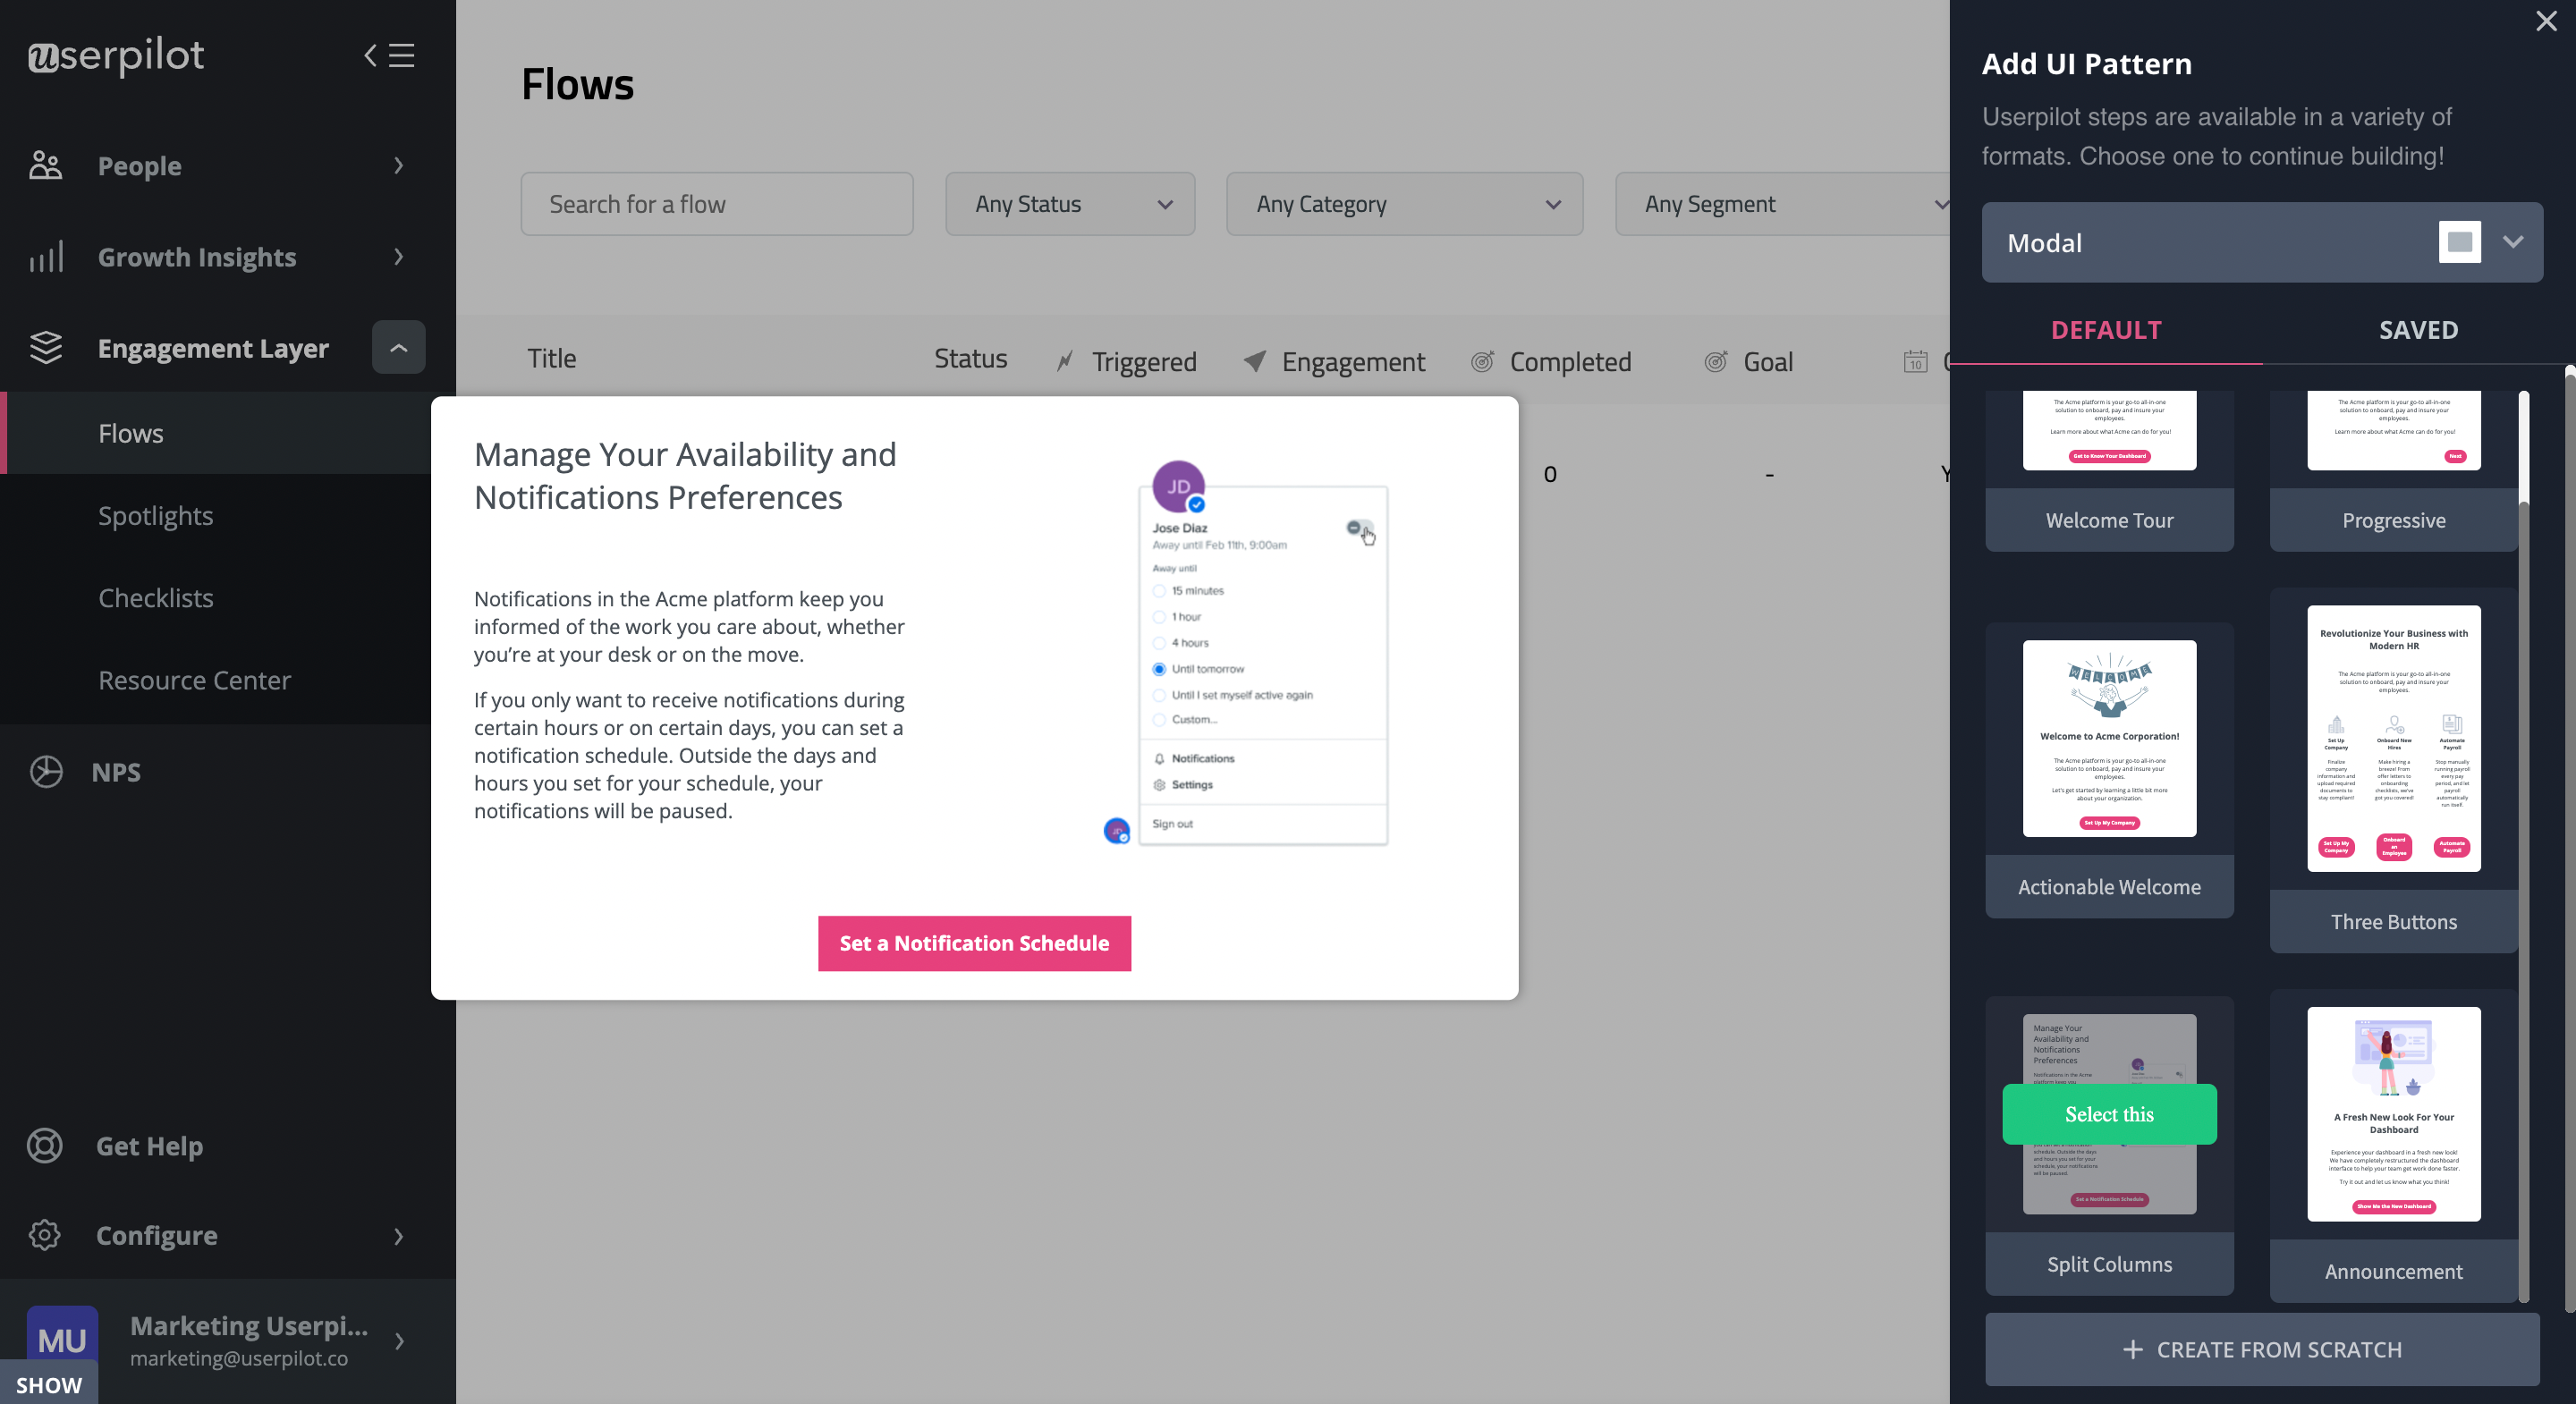 Building a modal from templates in Userpilot